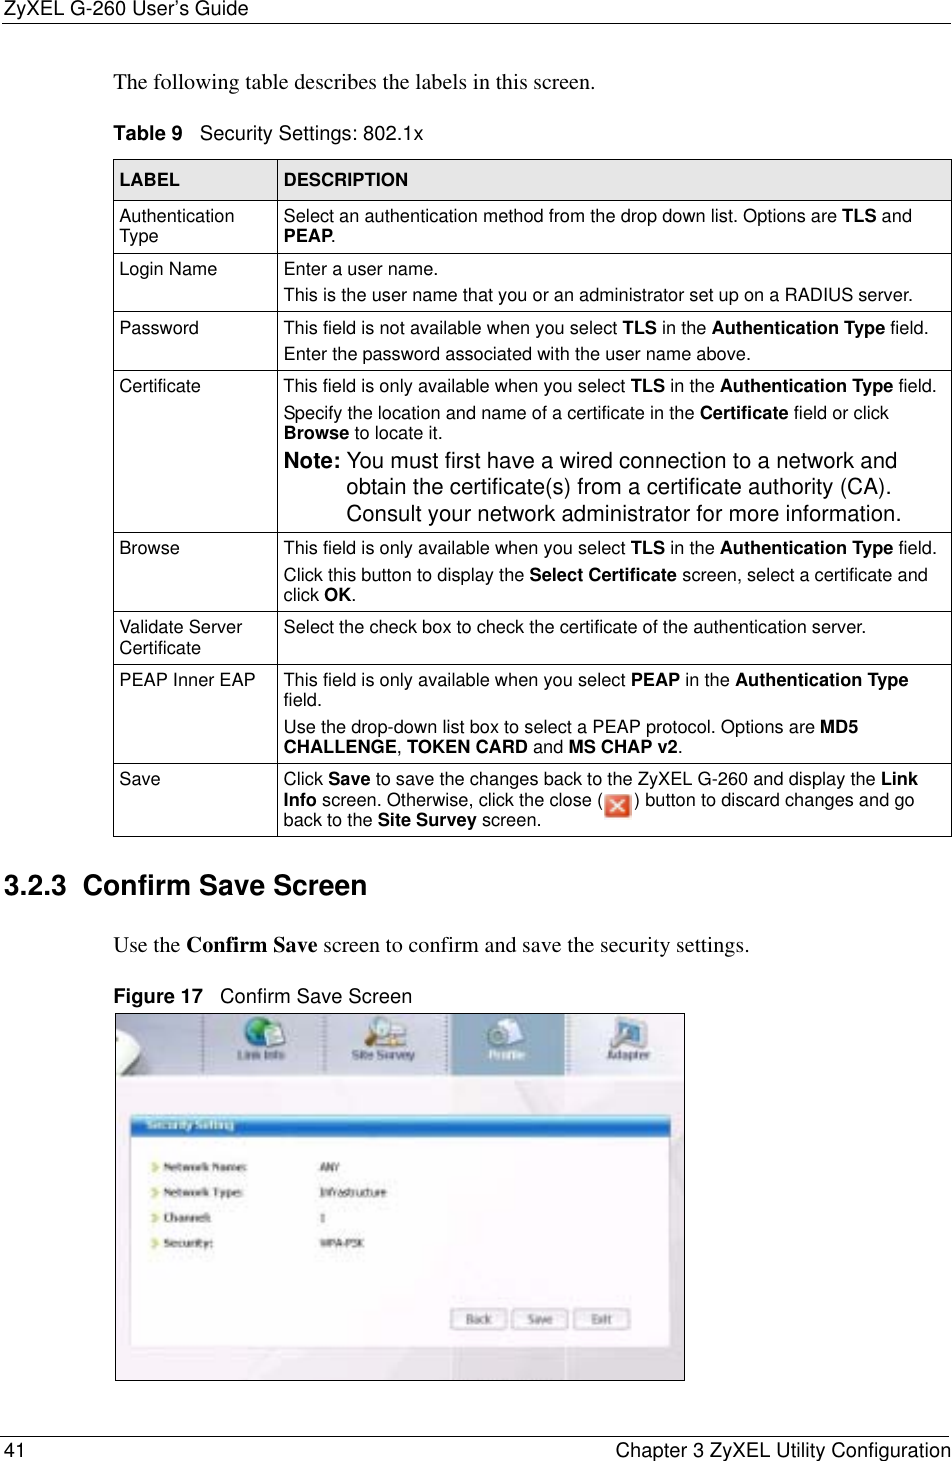 ZyXEL G-260 User’s Guide41 Chapter 3 ZyXEL Utility ConfigurationThe following table describes the labels in this screen.  3.2.3  Confirm Save ScreenUse the Confirm Save screen to confirm and save the security settings.Figure 17   Confirm Save Screen Table 9   Security Settings: 802.1xLABEL DESCRIPTIONAuthentication Type Select an authentication method from the drop down list. Options are TLS and PEAP.Login Name Enter a user name. This is the user name that you or an administrator set up on a RADIUS server.Password This field is not available when you select TLS in the Authentication Type field. Enter the password associated with the user name above. Certificate This field is only available when you select TLS in the Authentication Type field. Specify the location and name of a certificate in the Certificate field or click Browse to locate it.Note: You must first have a wired connection to a network and obtain the certificate(s) from a certificate authority (CA). Consult your network administrator for more information.Browse This field is only available when you select TLS in the Authentication Type field.Click this button to display the Select Certificate screen, select a certificate and click OK.Validate Server Certificate Select the check box to check the certificate of the authentication server.PEAP Inner EAP This field is only available when you select PEAP in the Authentication Typefield.Use the drop-down list box to select a PEAP protocol. Options are MD5CHALLENGE,TOKEN CARD and MS CHAP v2.Save Click Save to save the changes back to the ZyXEL G-260 and display the Link Info screen. Otherwise, click the close ( ) button to discard changes and go back to the Site Survey screen.